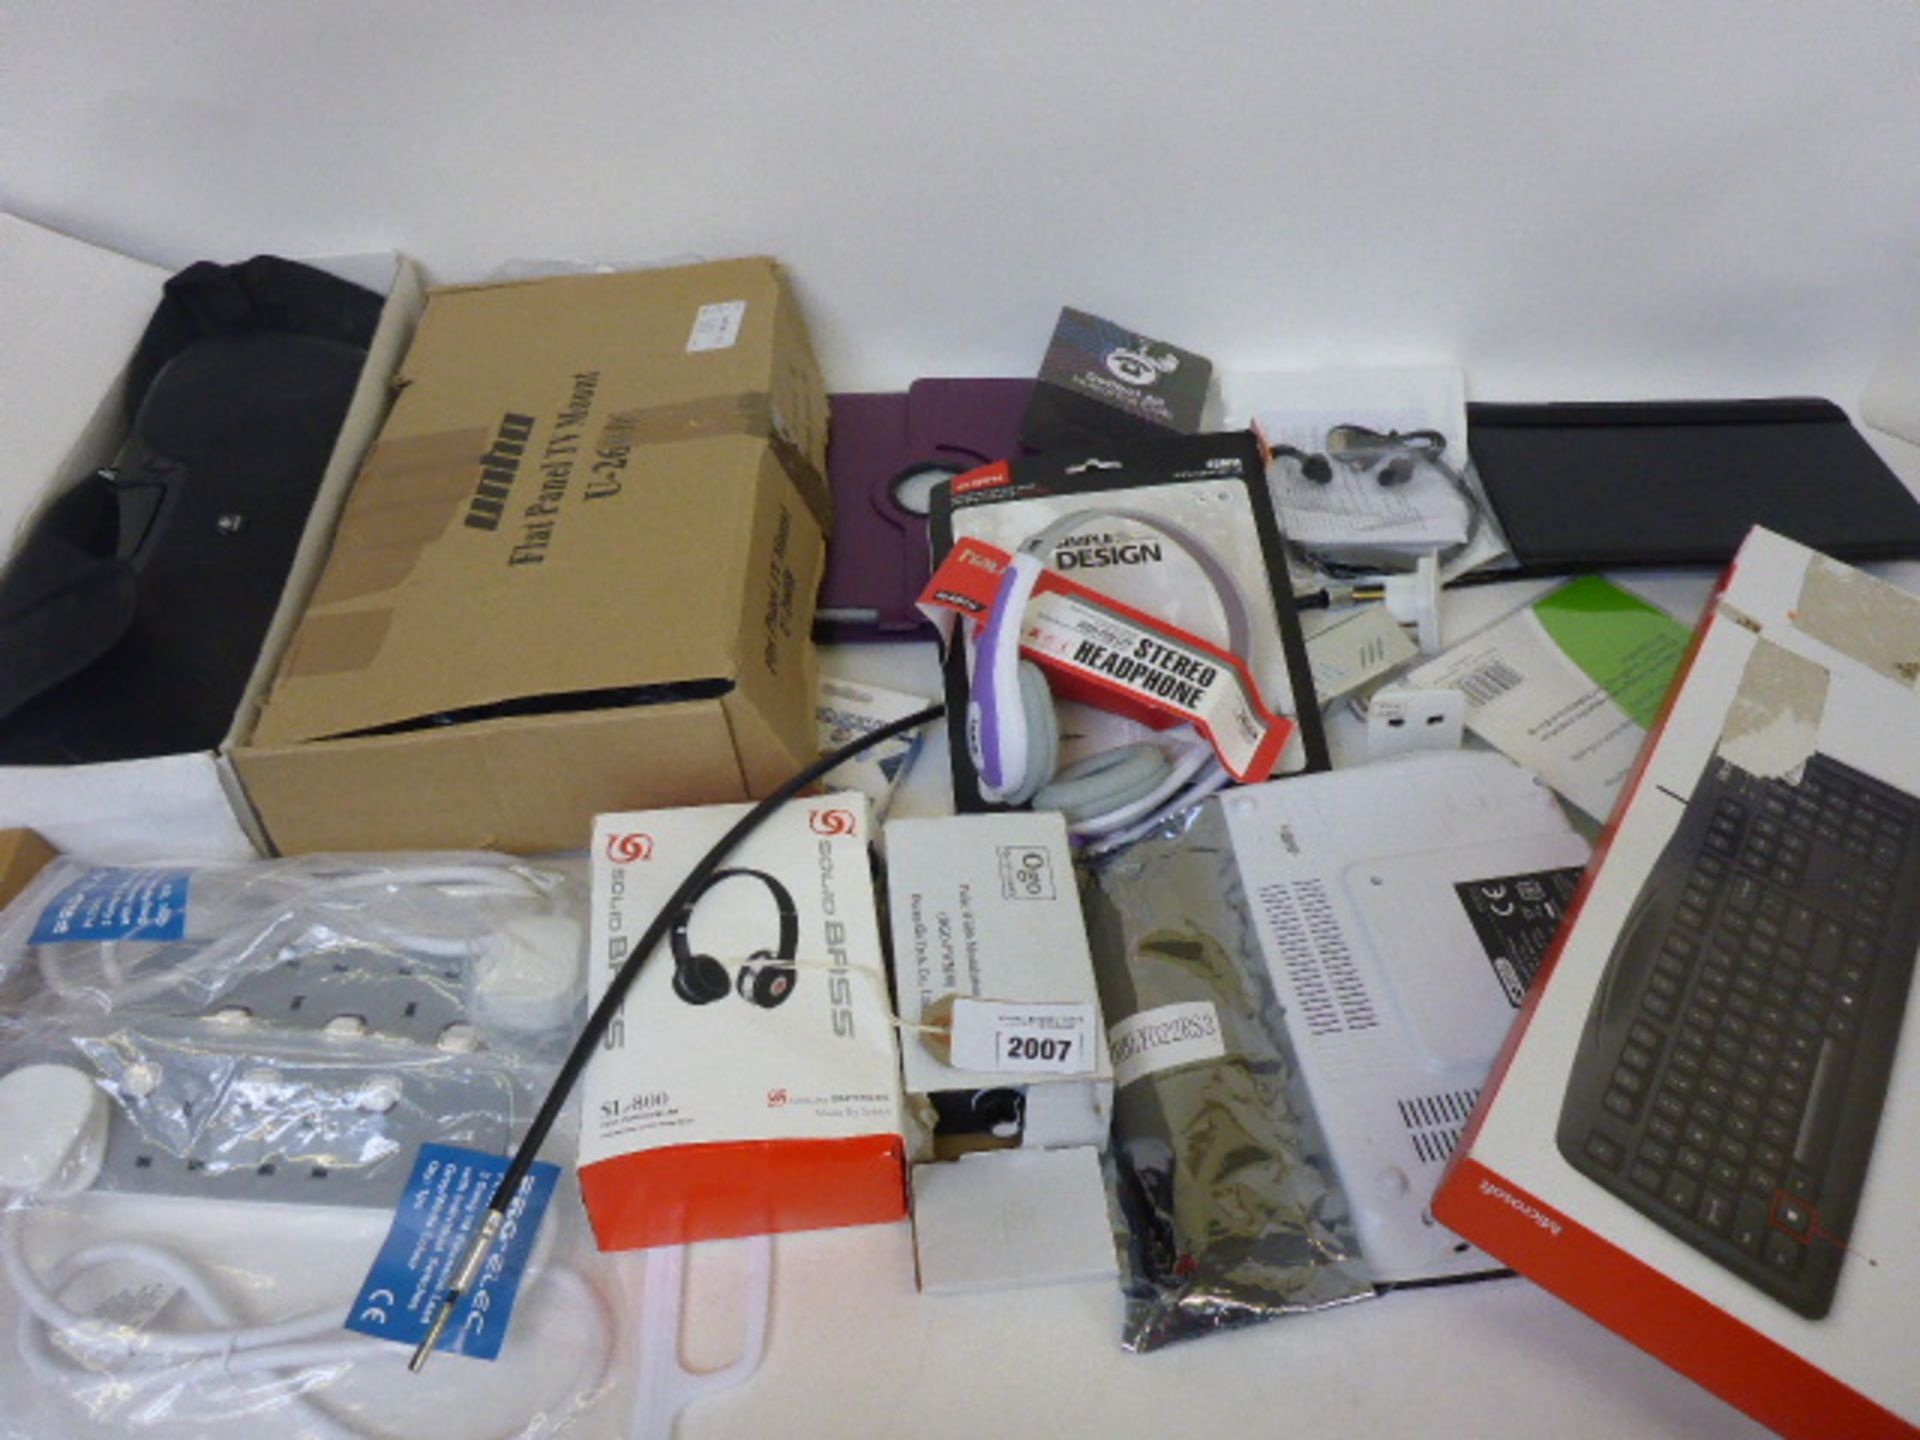 Bag containing TV wall mount, extension leads, pad covers, head phones, keyboard, rechargeable